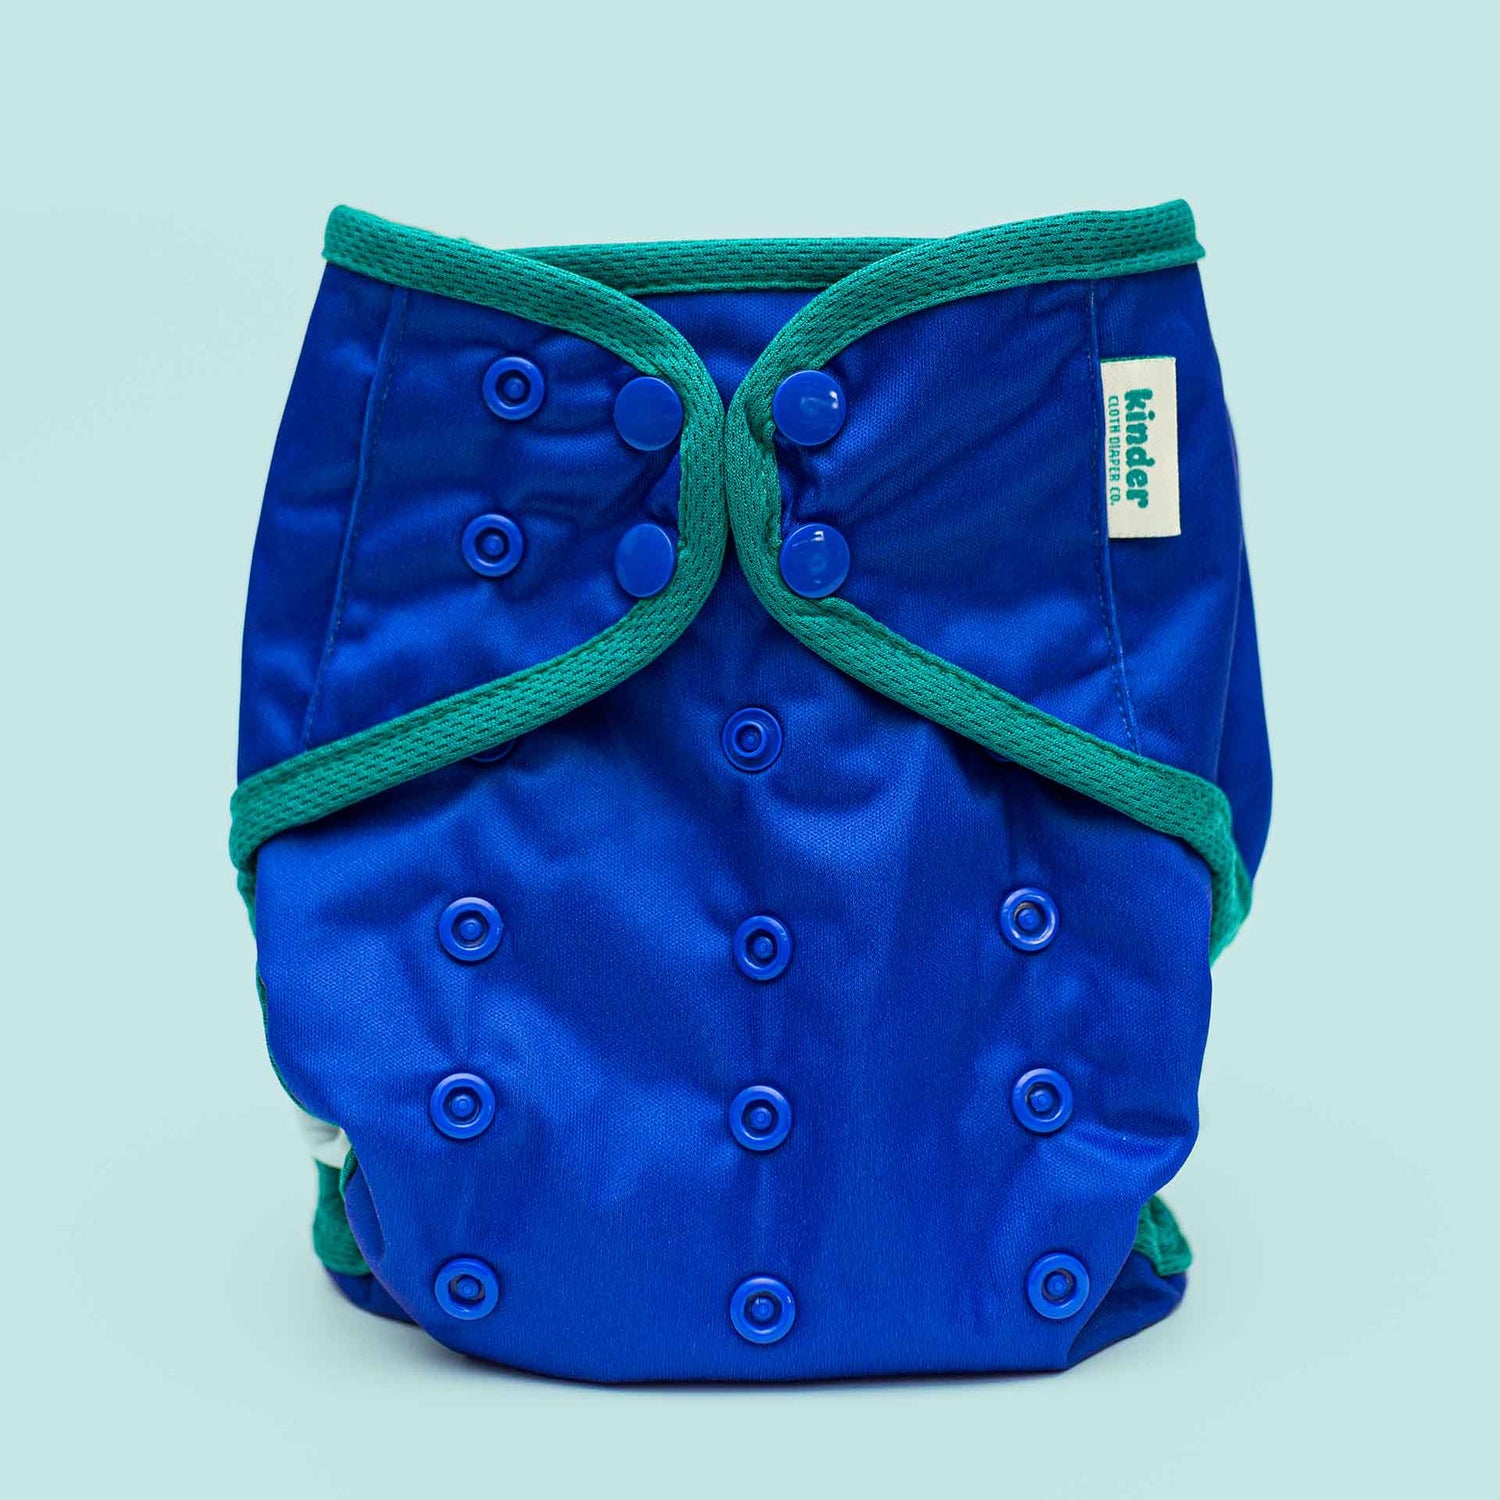 modern reusable diaper cover blue kinder cloth diapers best diaper cover ever pittsburgh usa